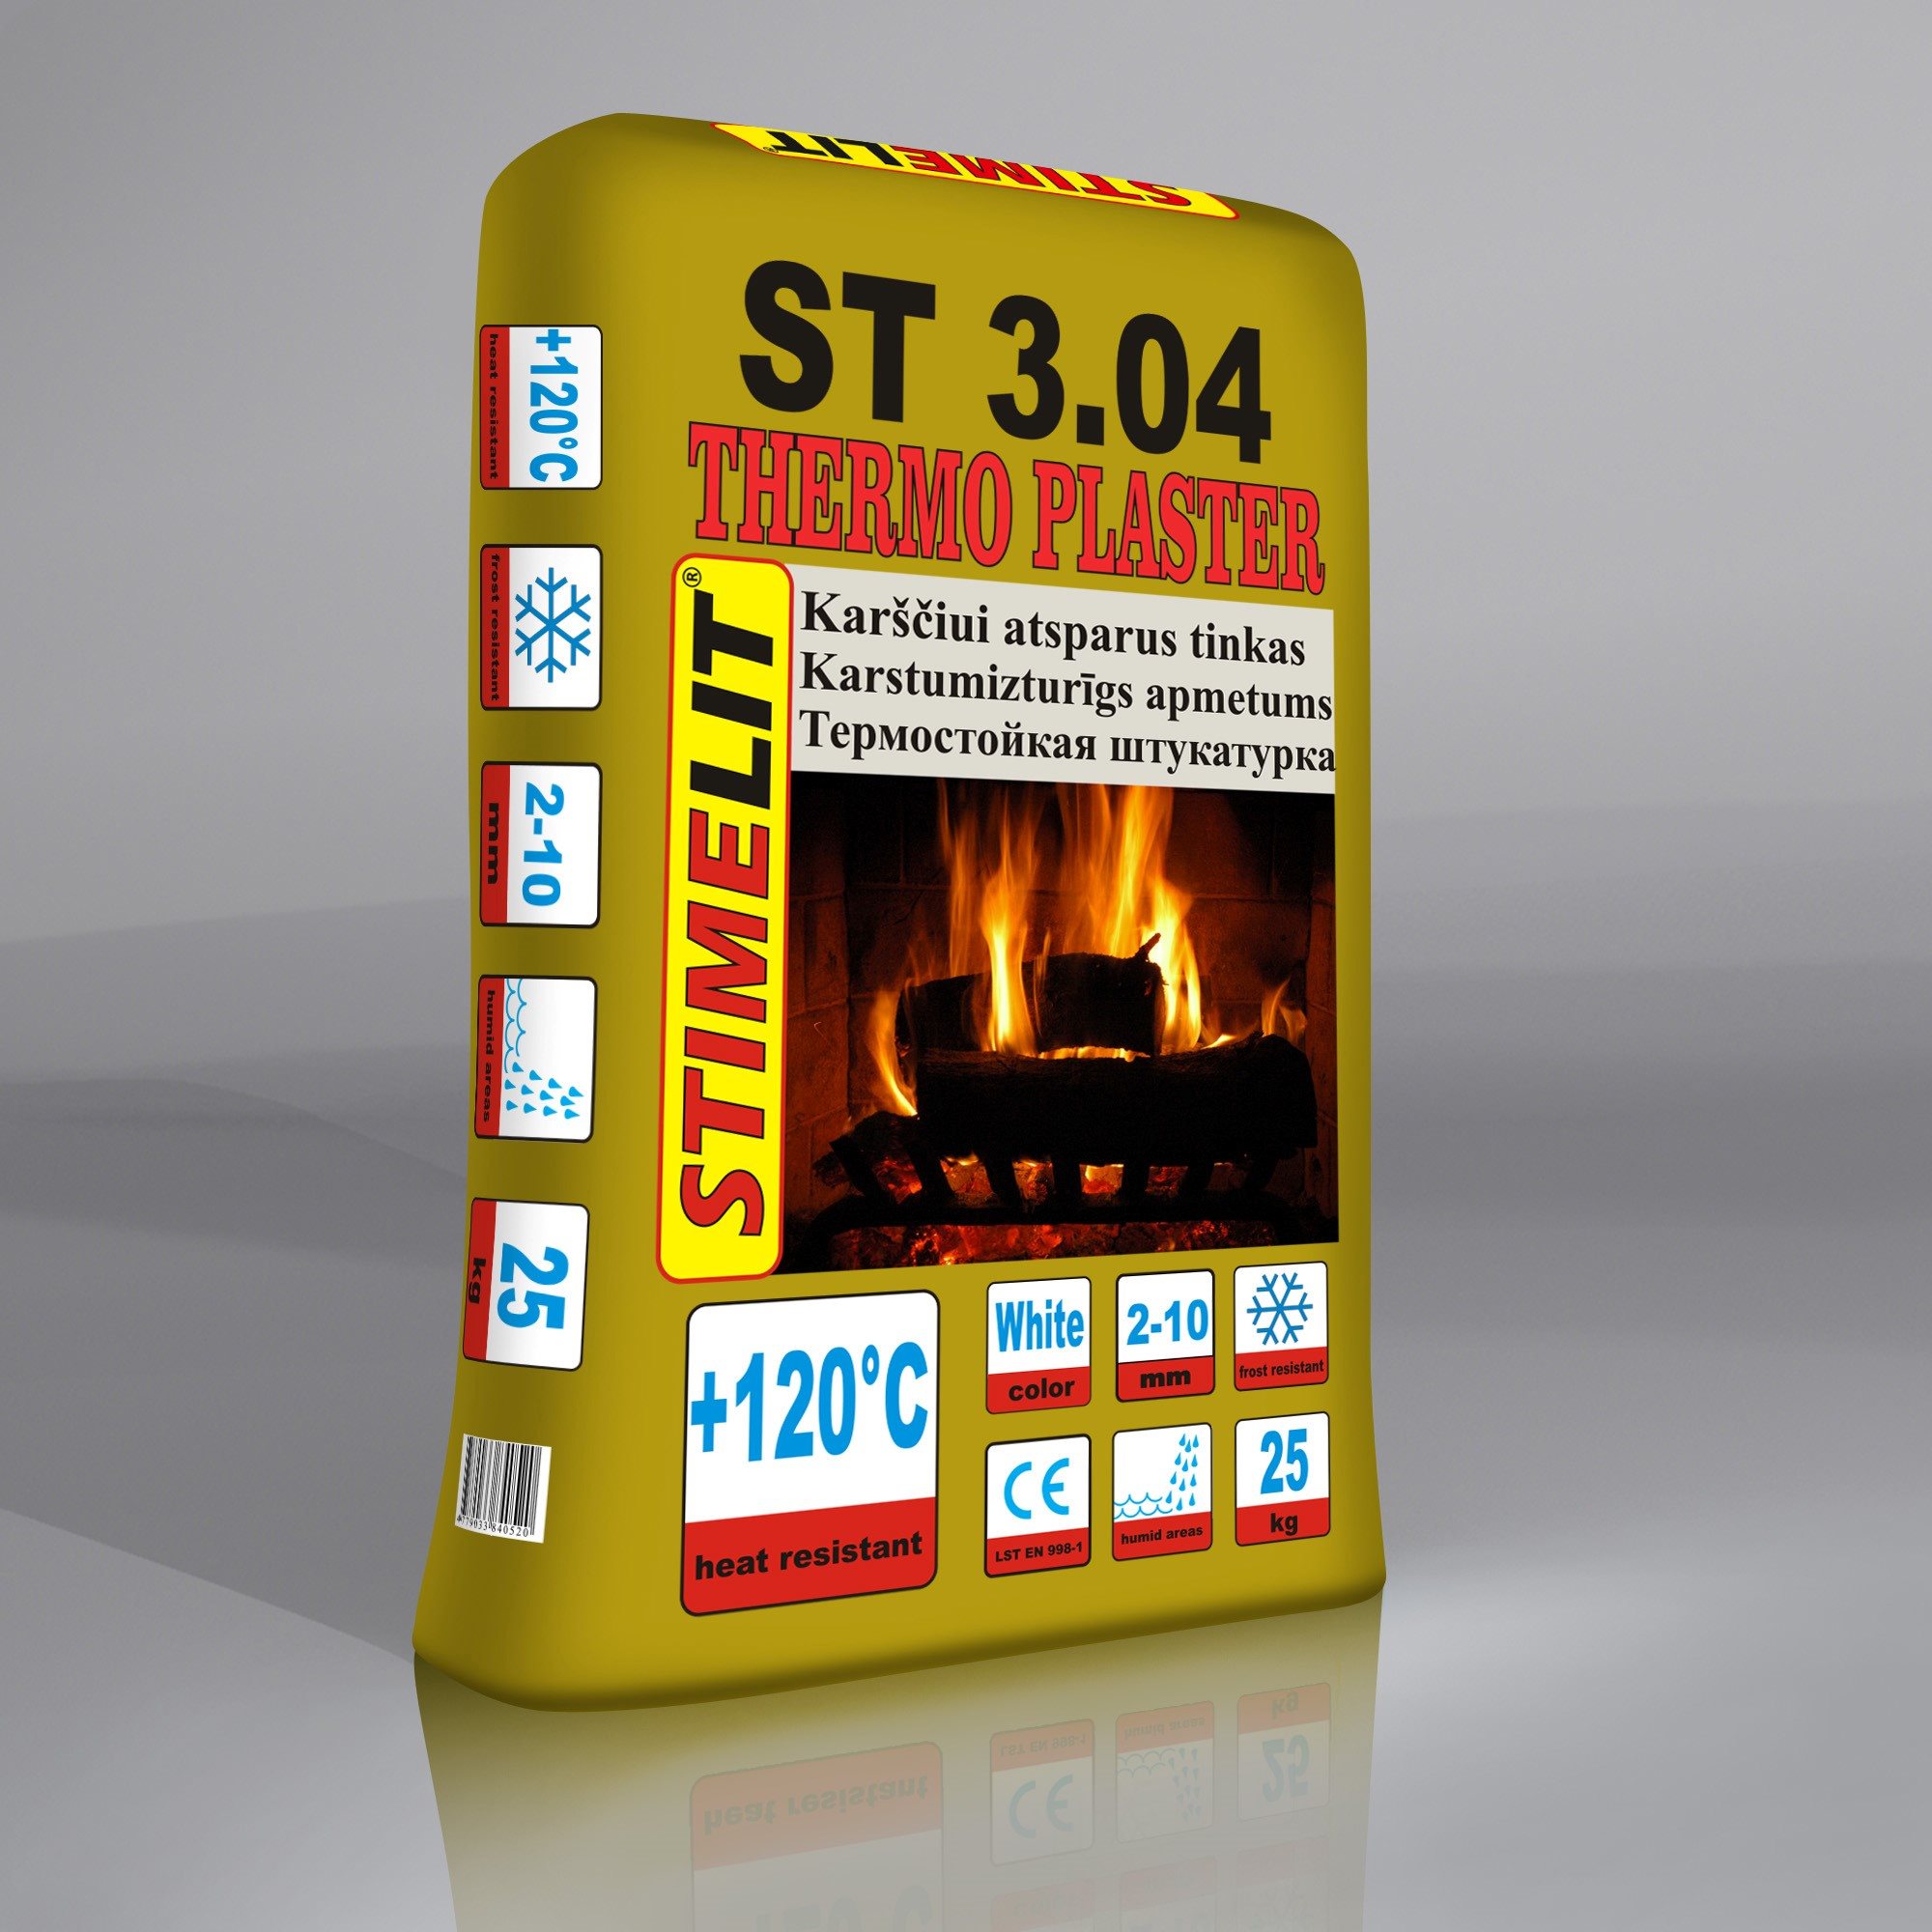 ST3.04 Thermo plaster